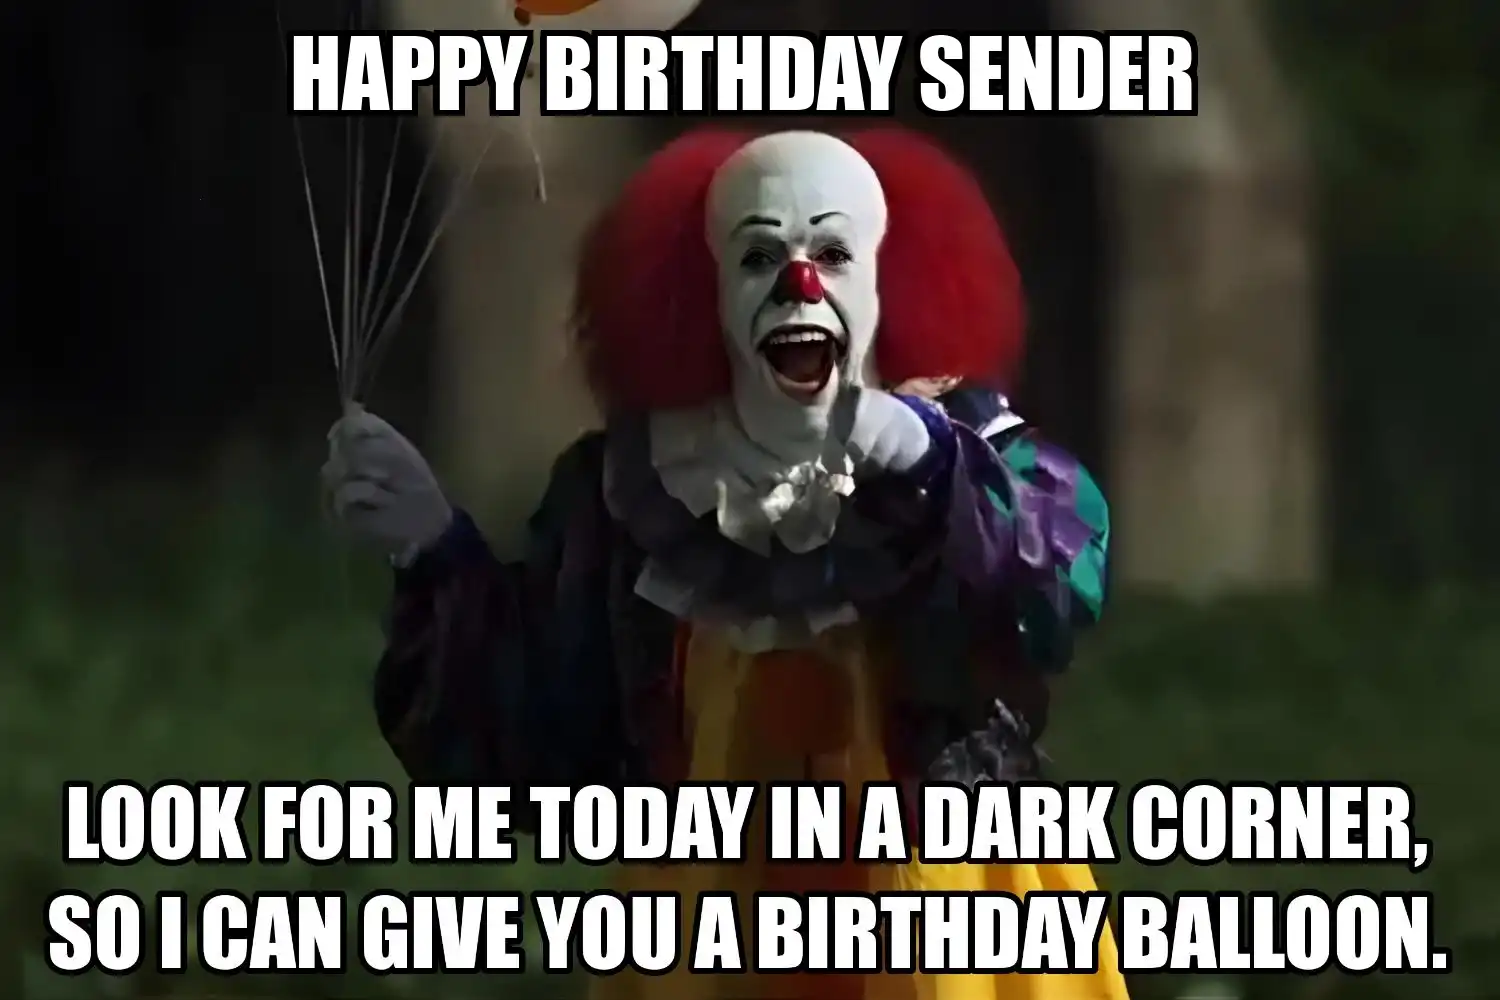 Happy Birthday Sender I Can Give You A Balloon Meme